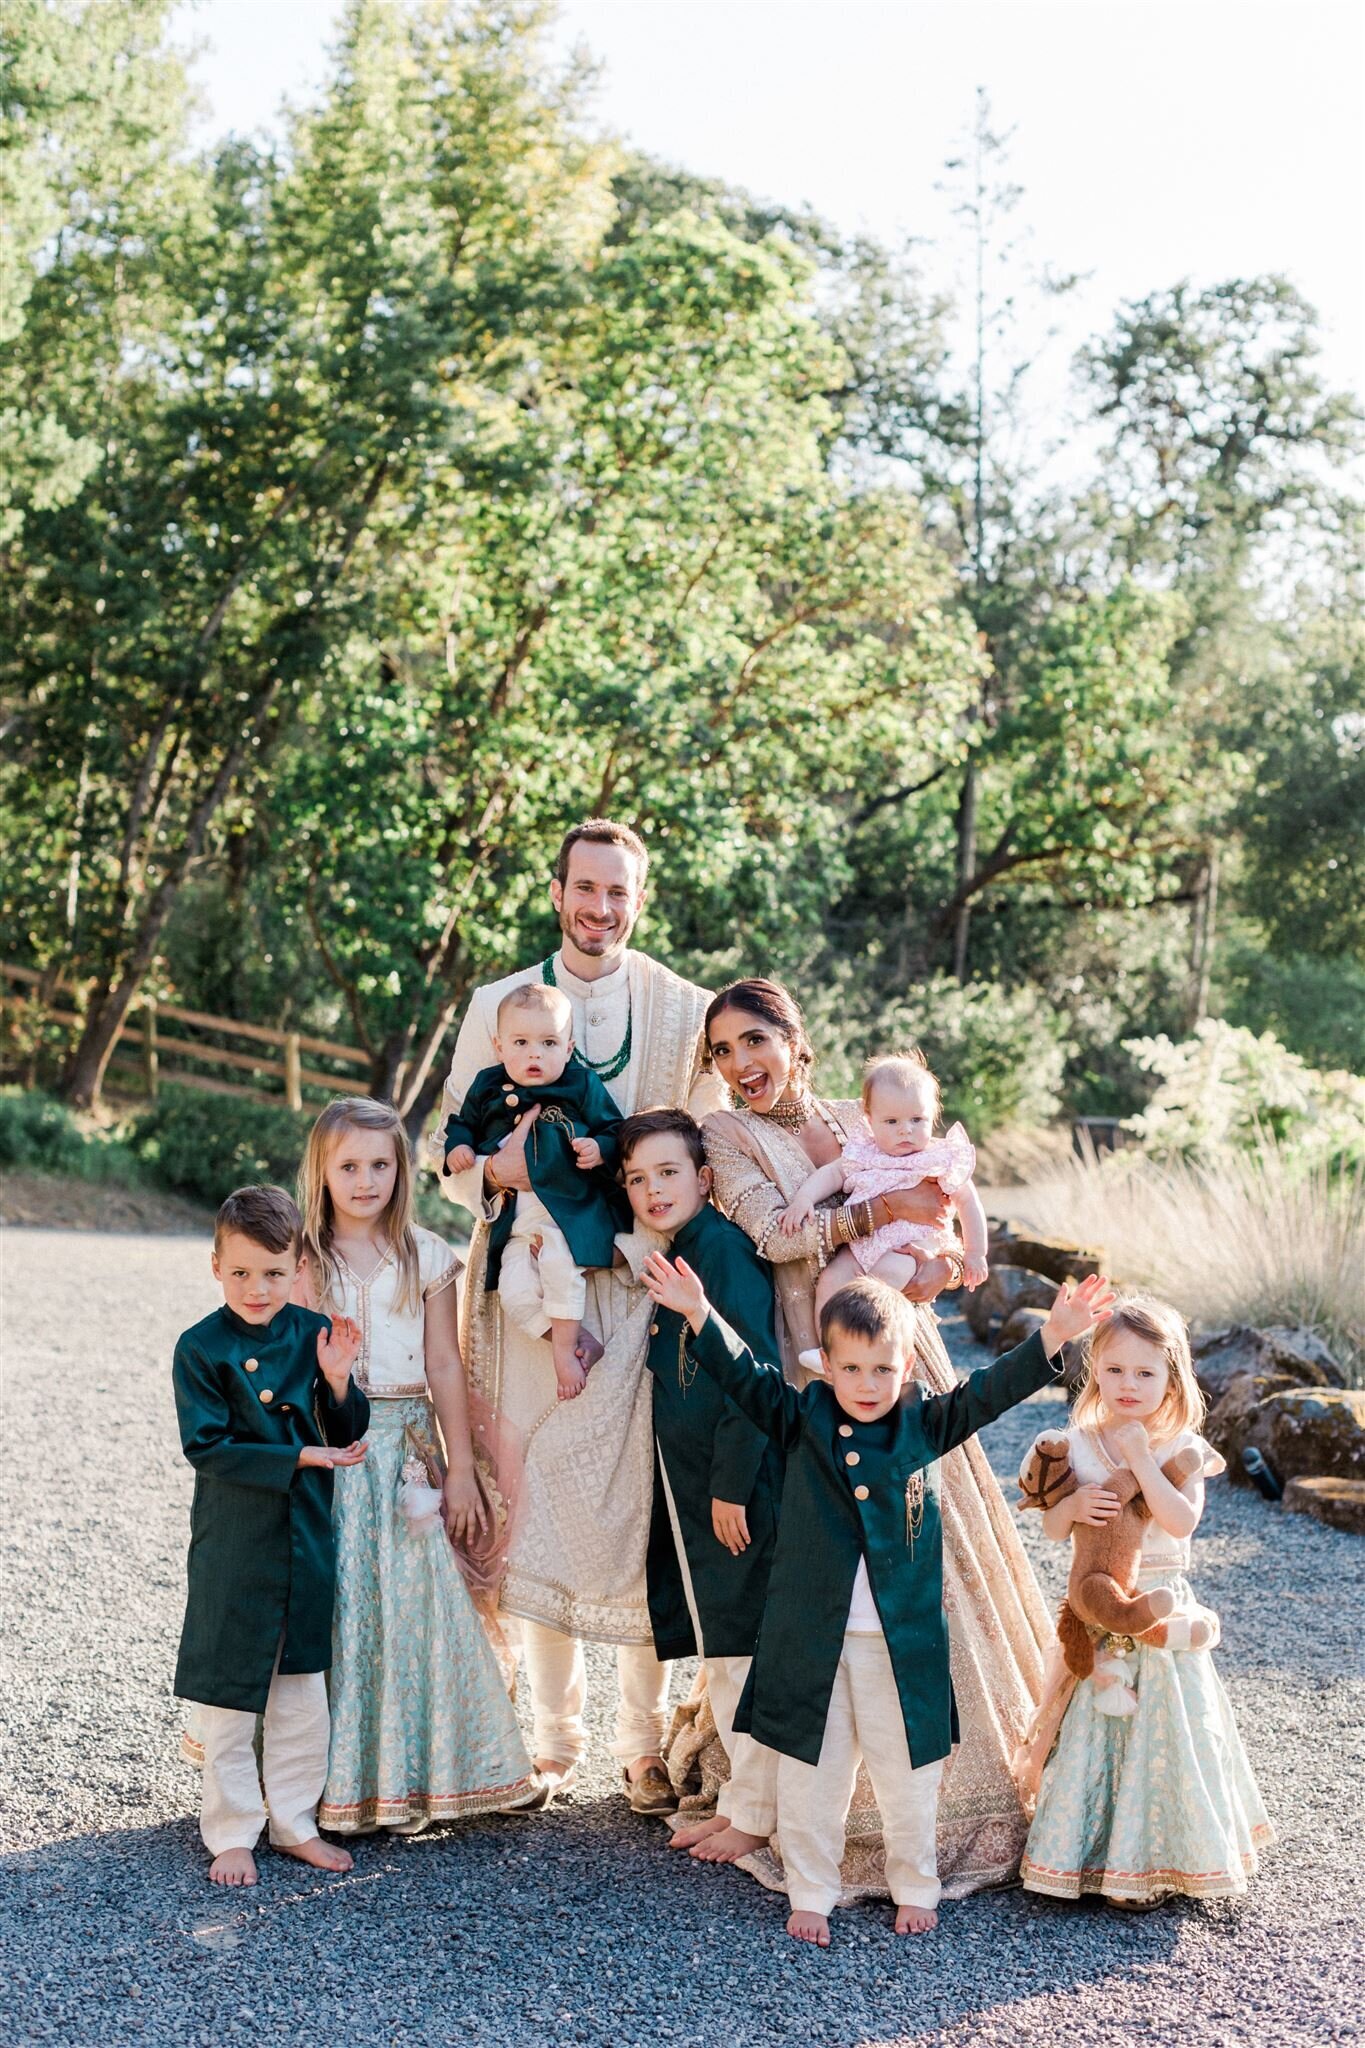 Private Ranch Vineyard Wedding-Valorie Darling Photography-737_websize